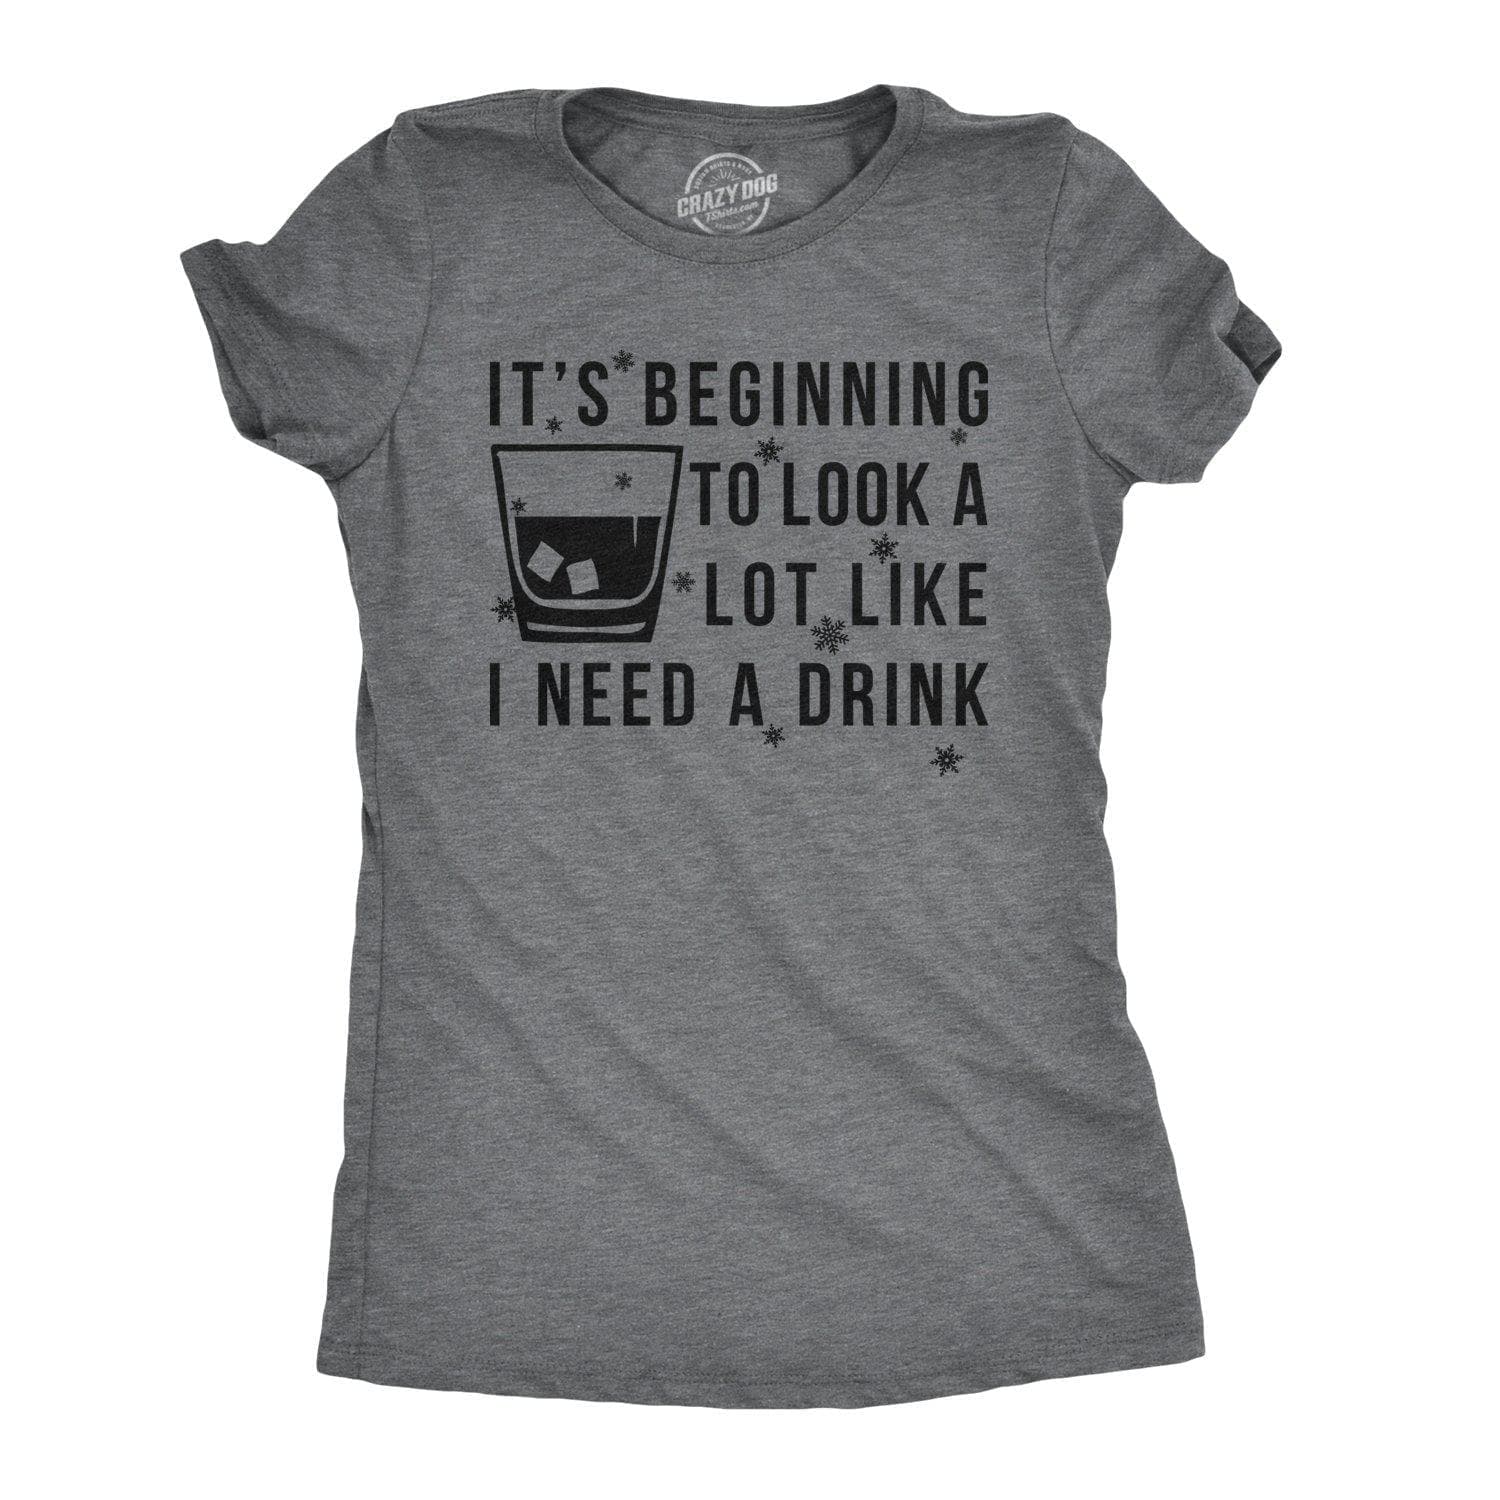 t's Beginning To Look A Lot Like I Need A Drink Women's Tshirt - Crazy Dog T-Shirts